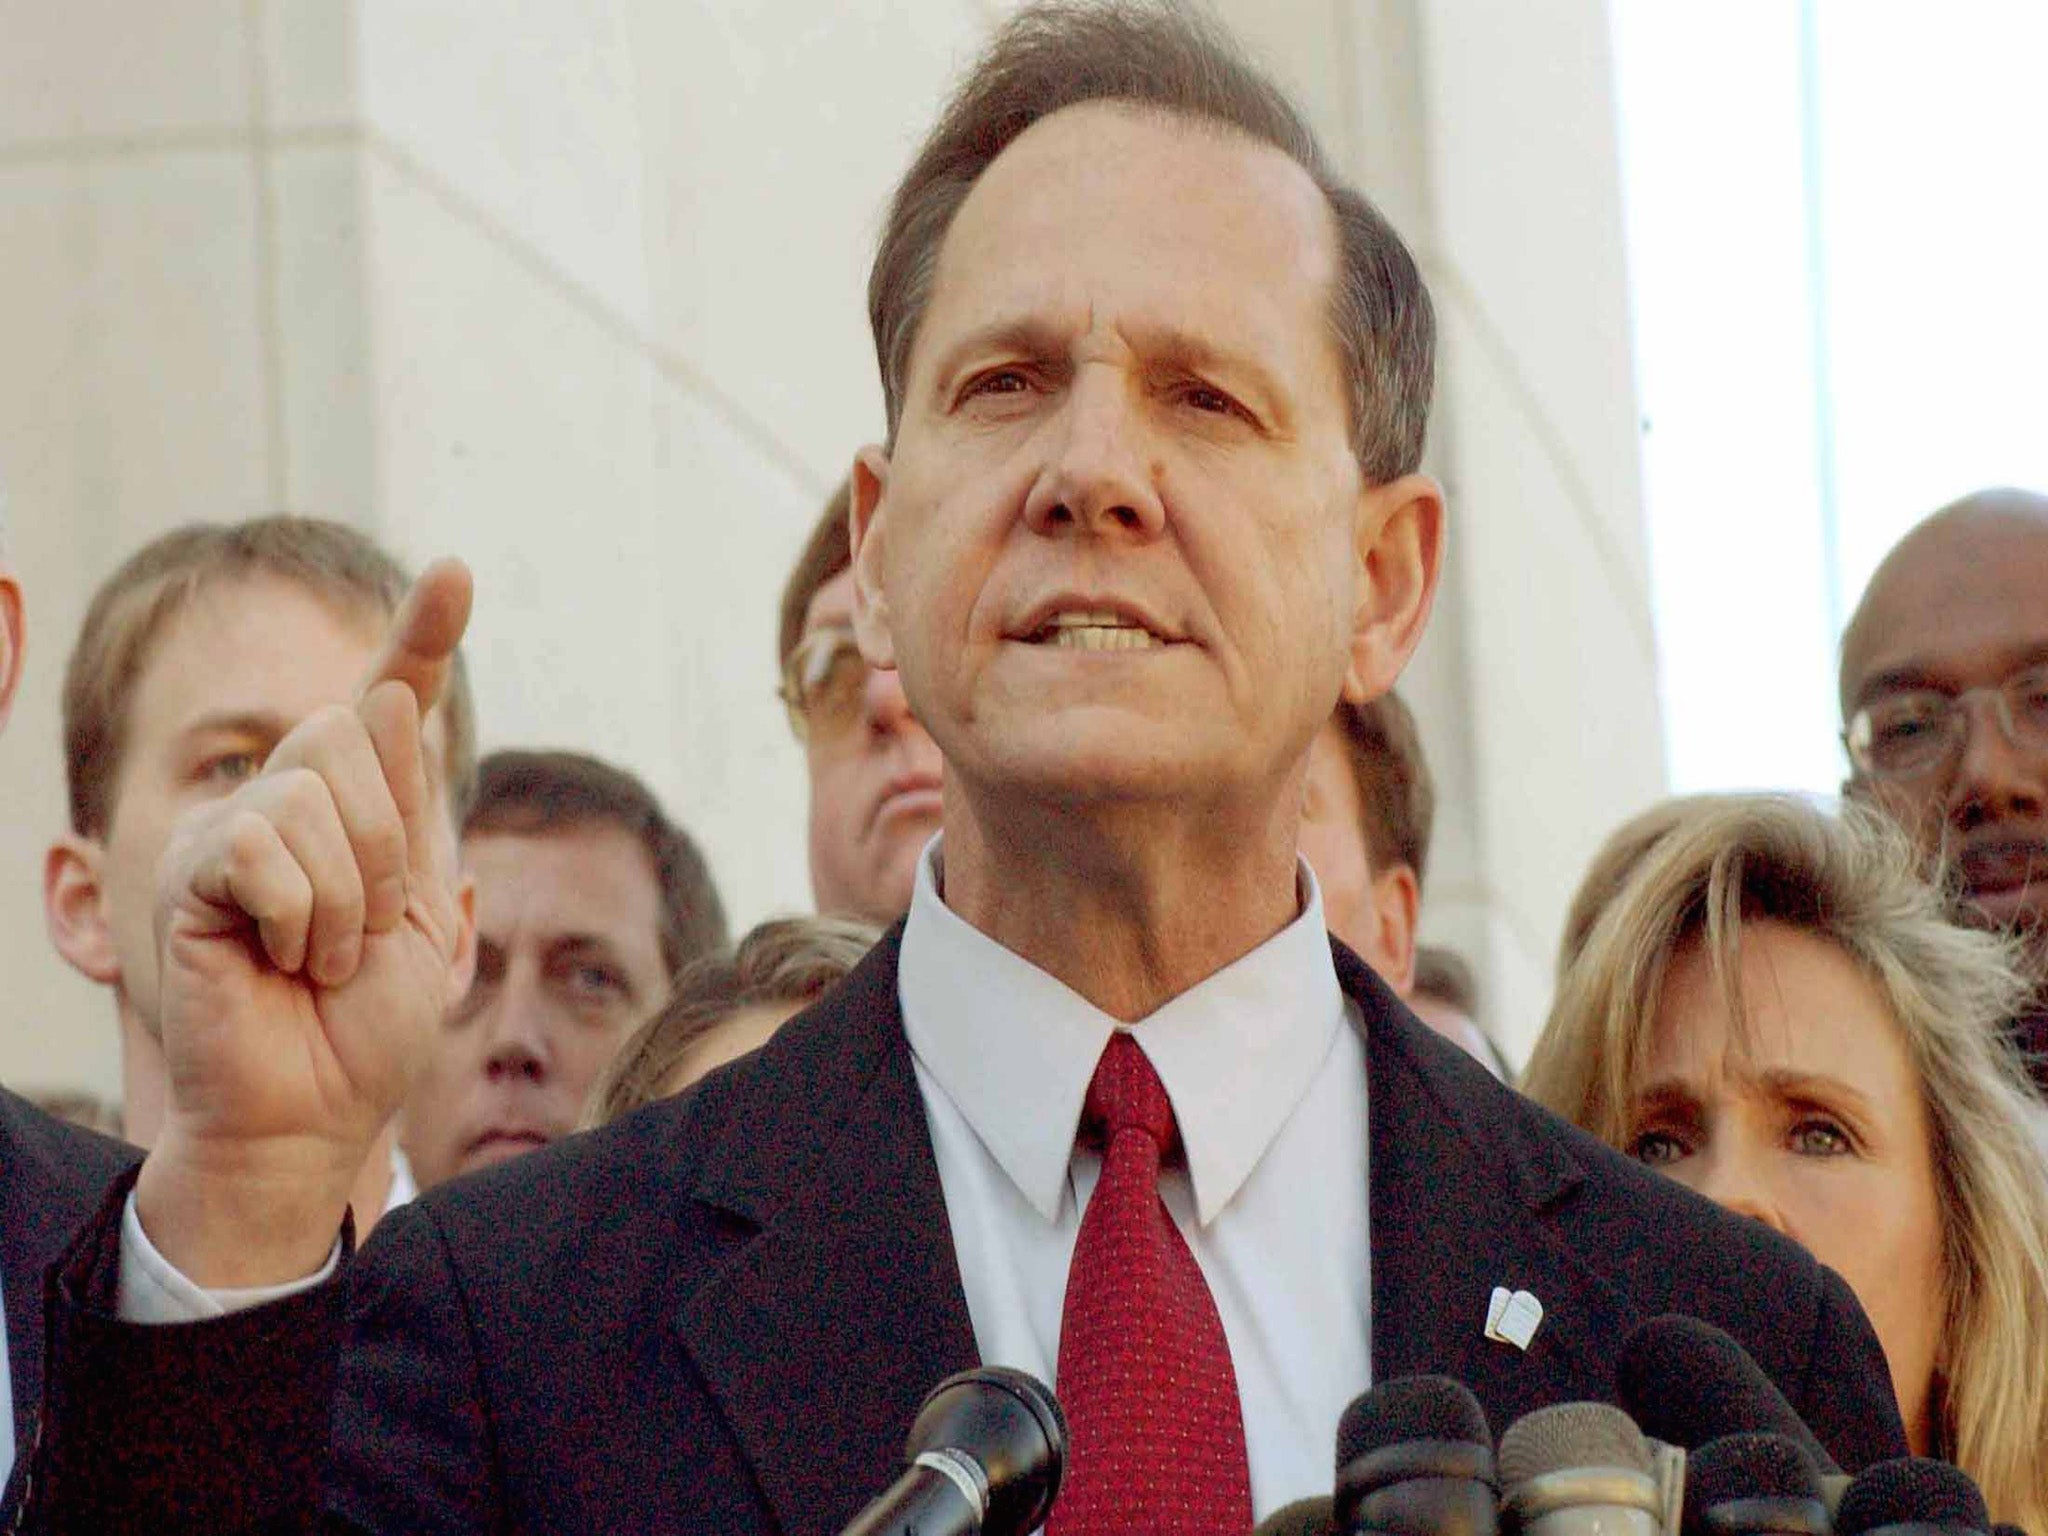 Roy Moore was forced to stand down in 2003 after refusing to remove a statue of the Ten Commandments from his court. He was later reelected